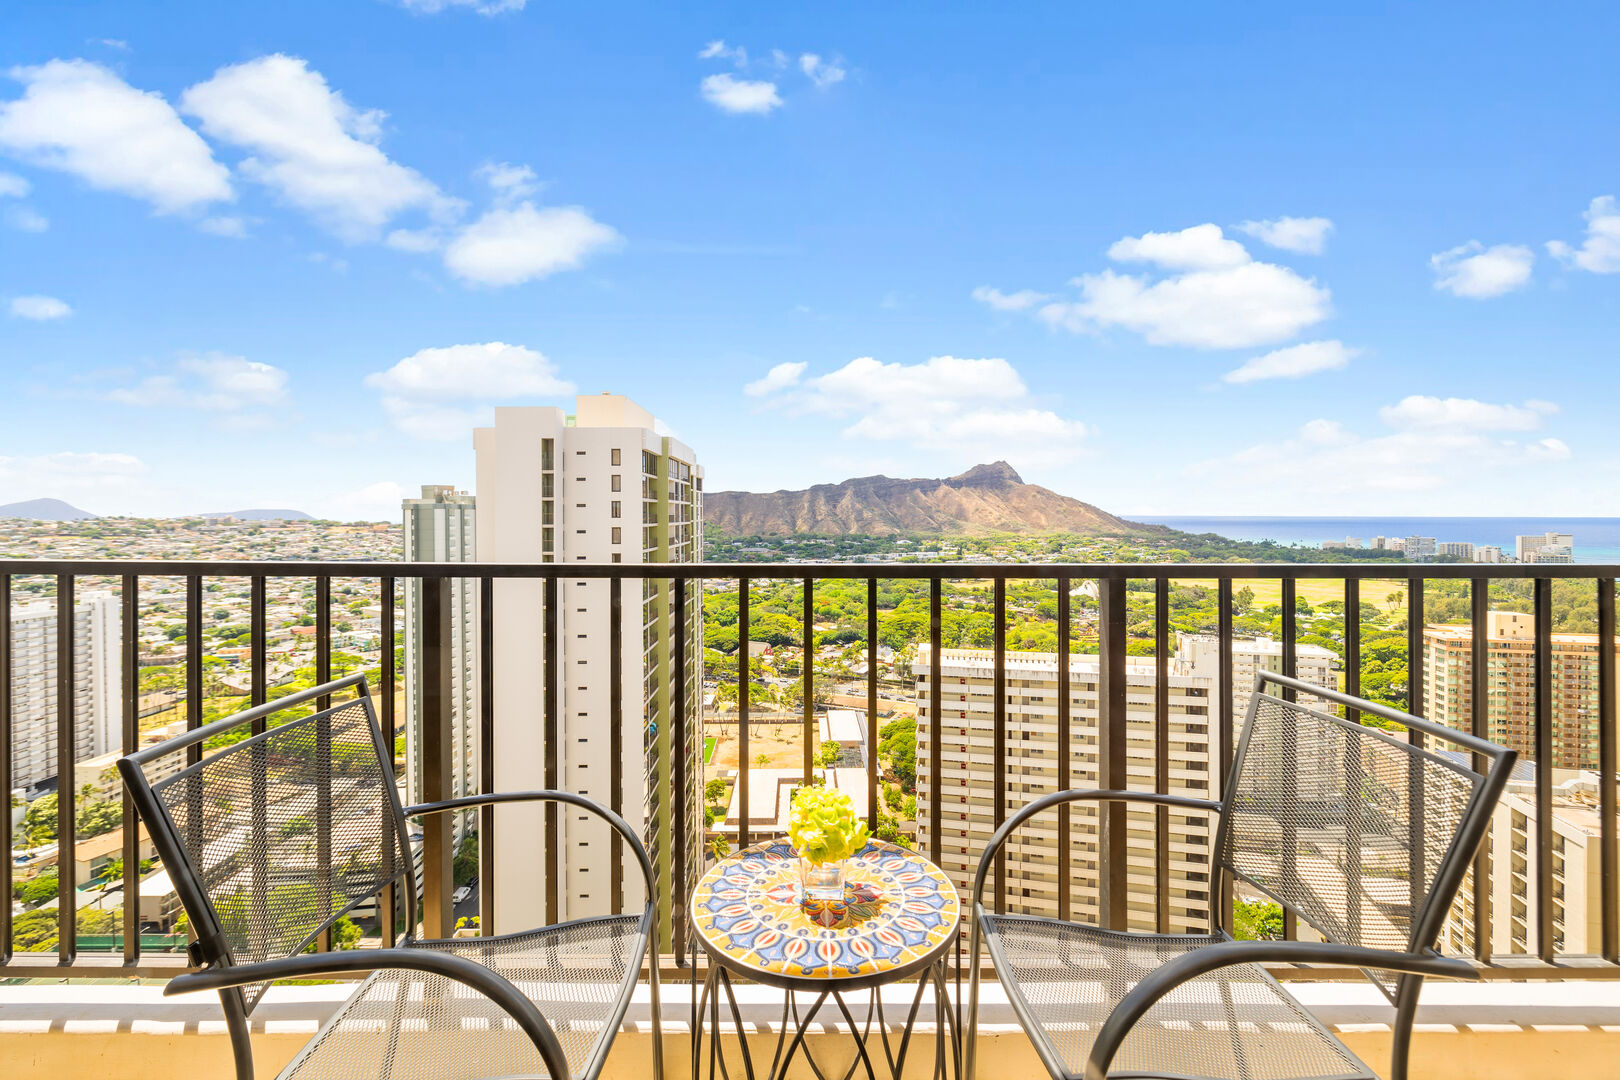 Enjoy the beautiful Diamond Head and mountain views from your own private lanai while having a sip of your morning coffee!